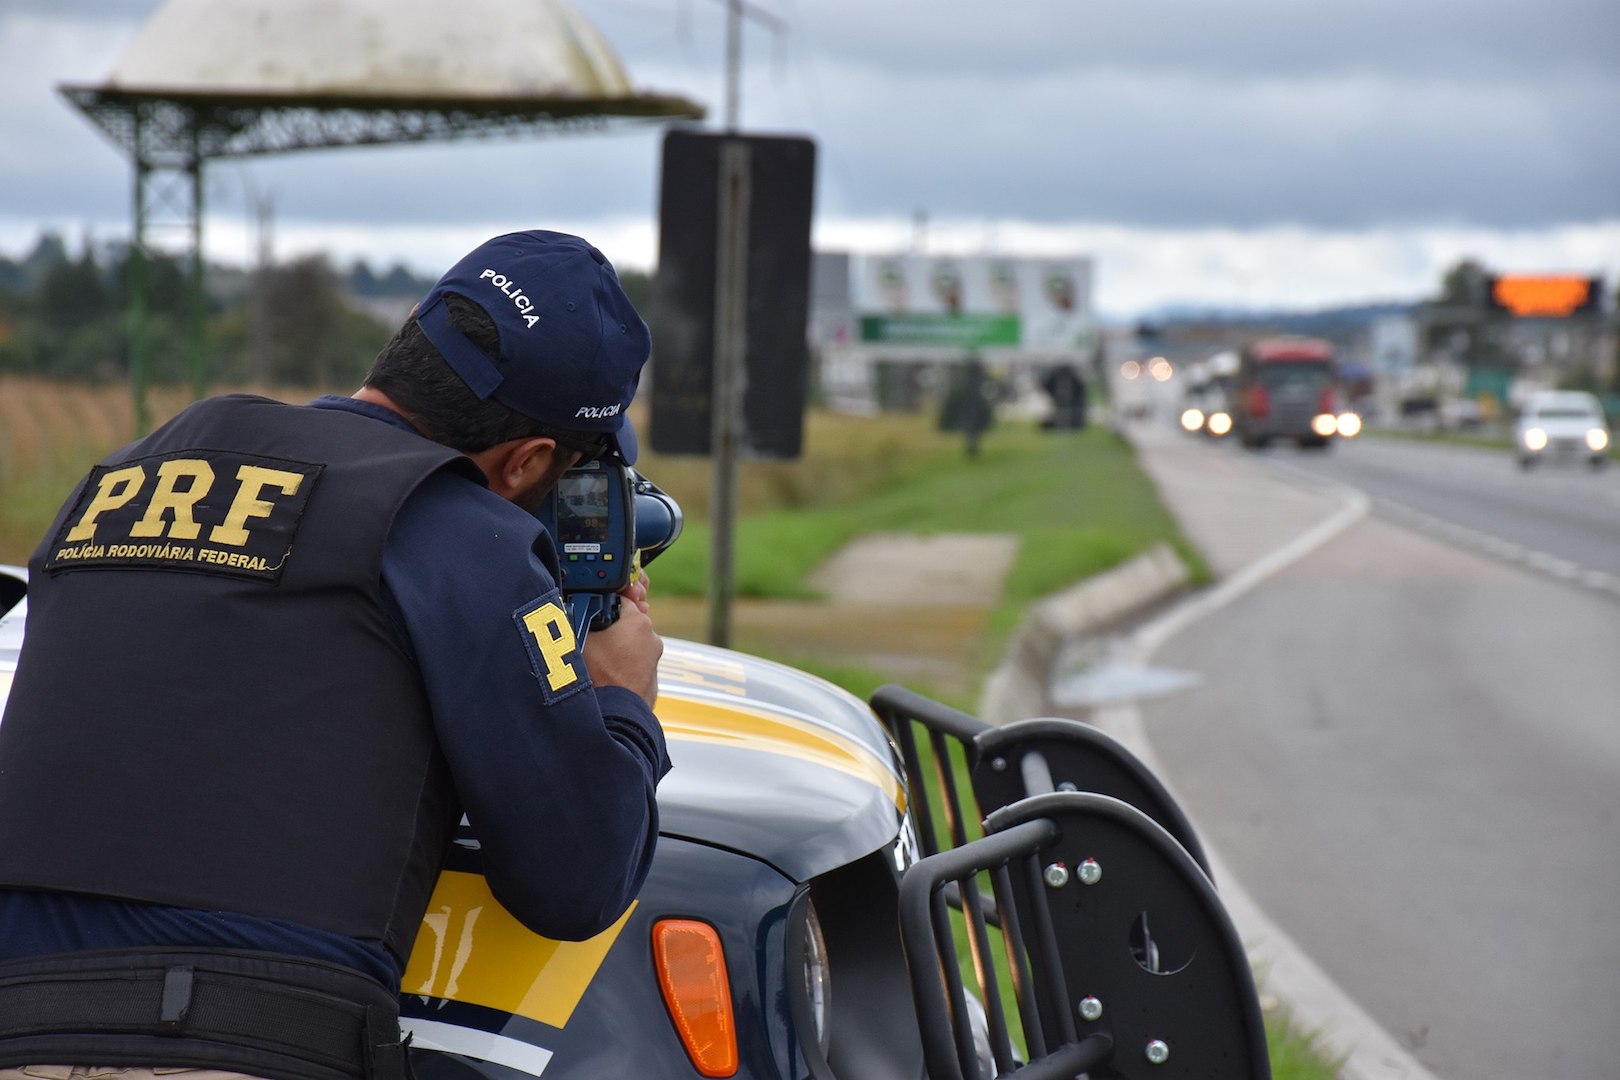 Mobile radars being used by federal highway police may become a thing of the past, according to President Bolsonaro,